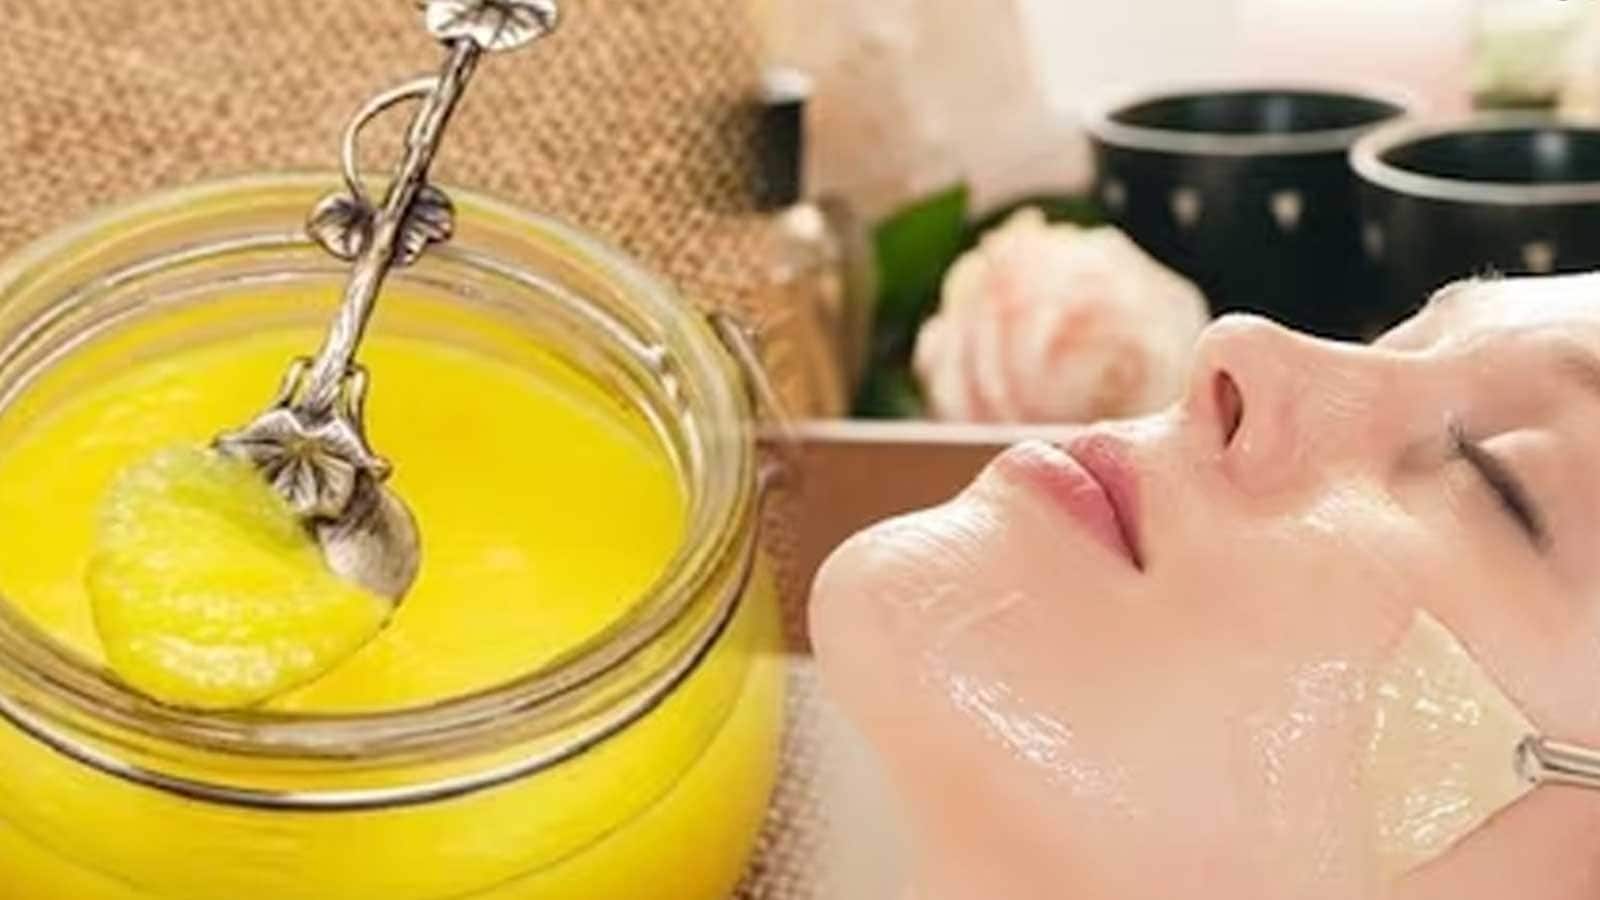 What Are The Benefits Of Applying Desi Ghee On Skin?